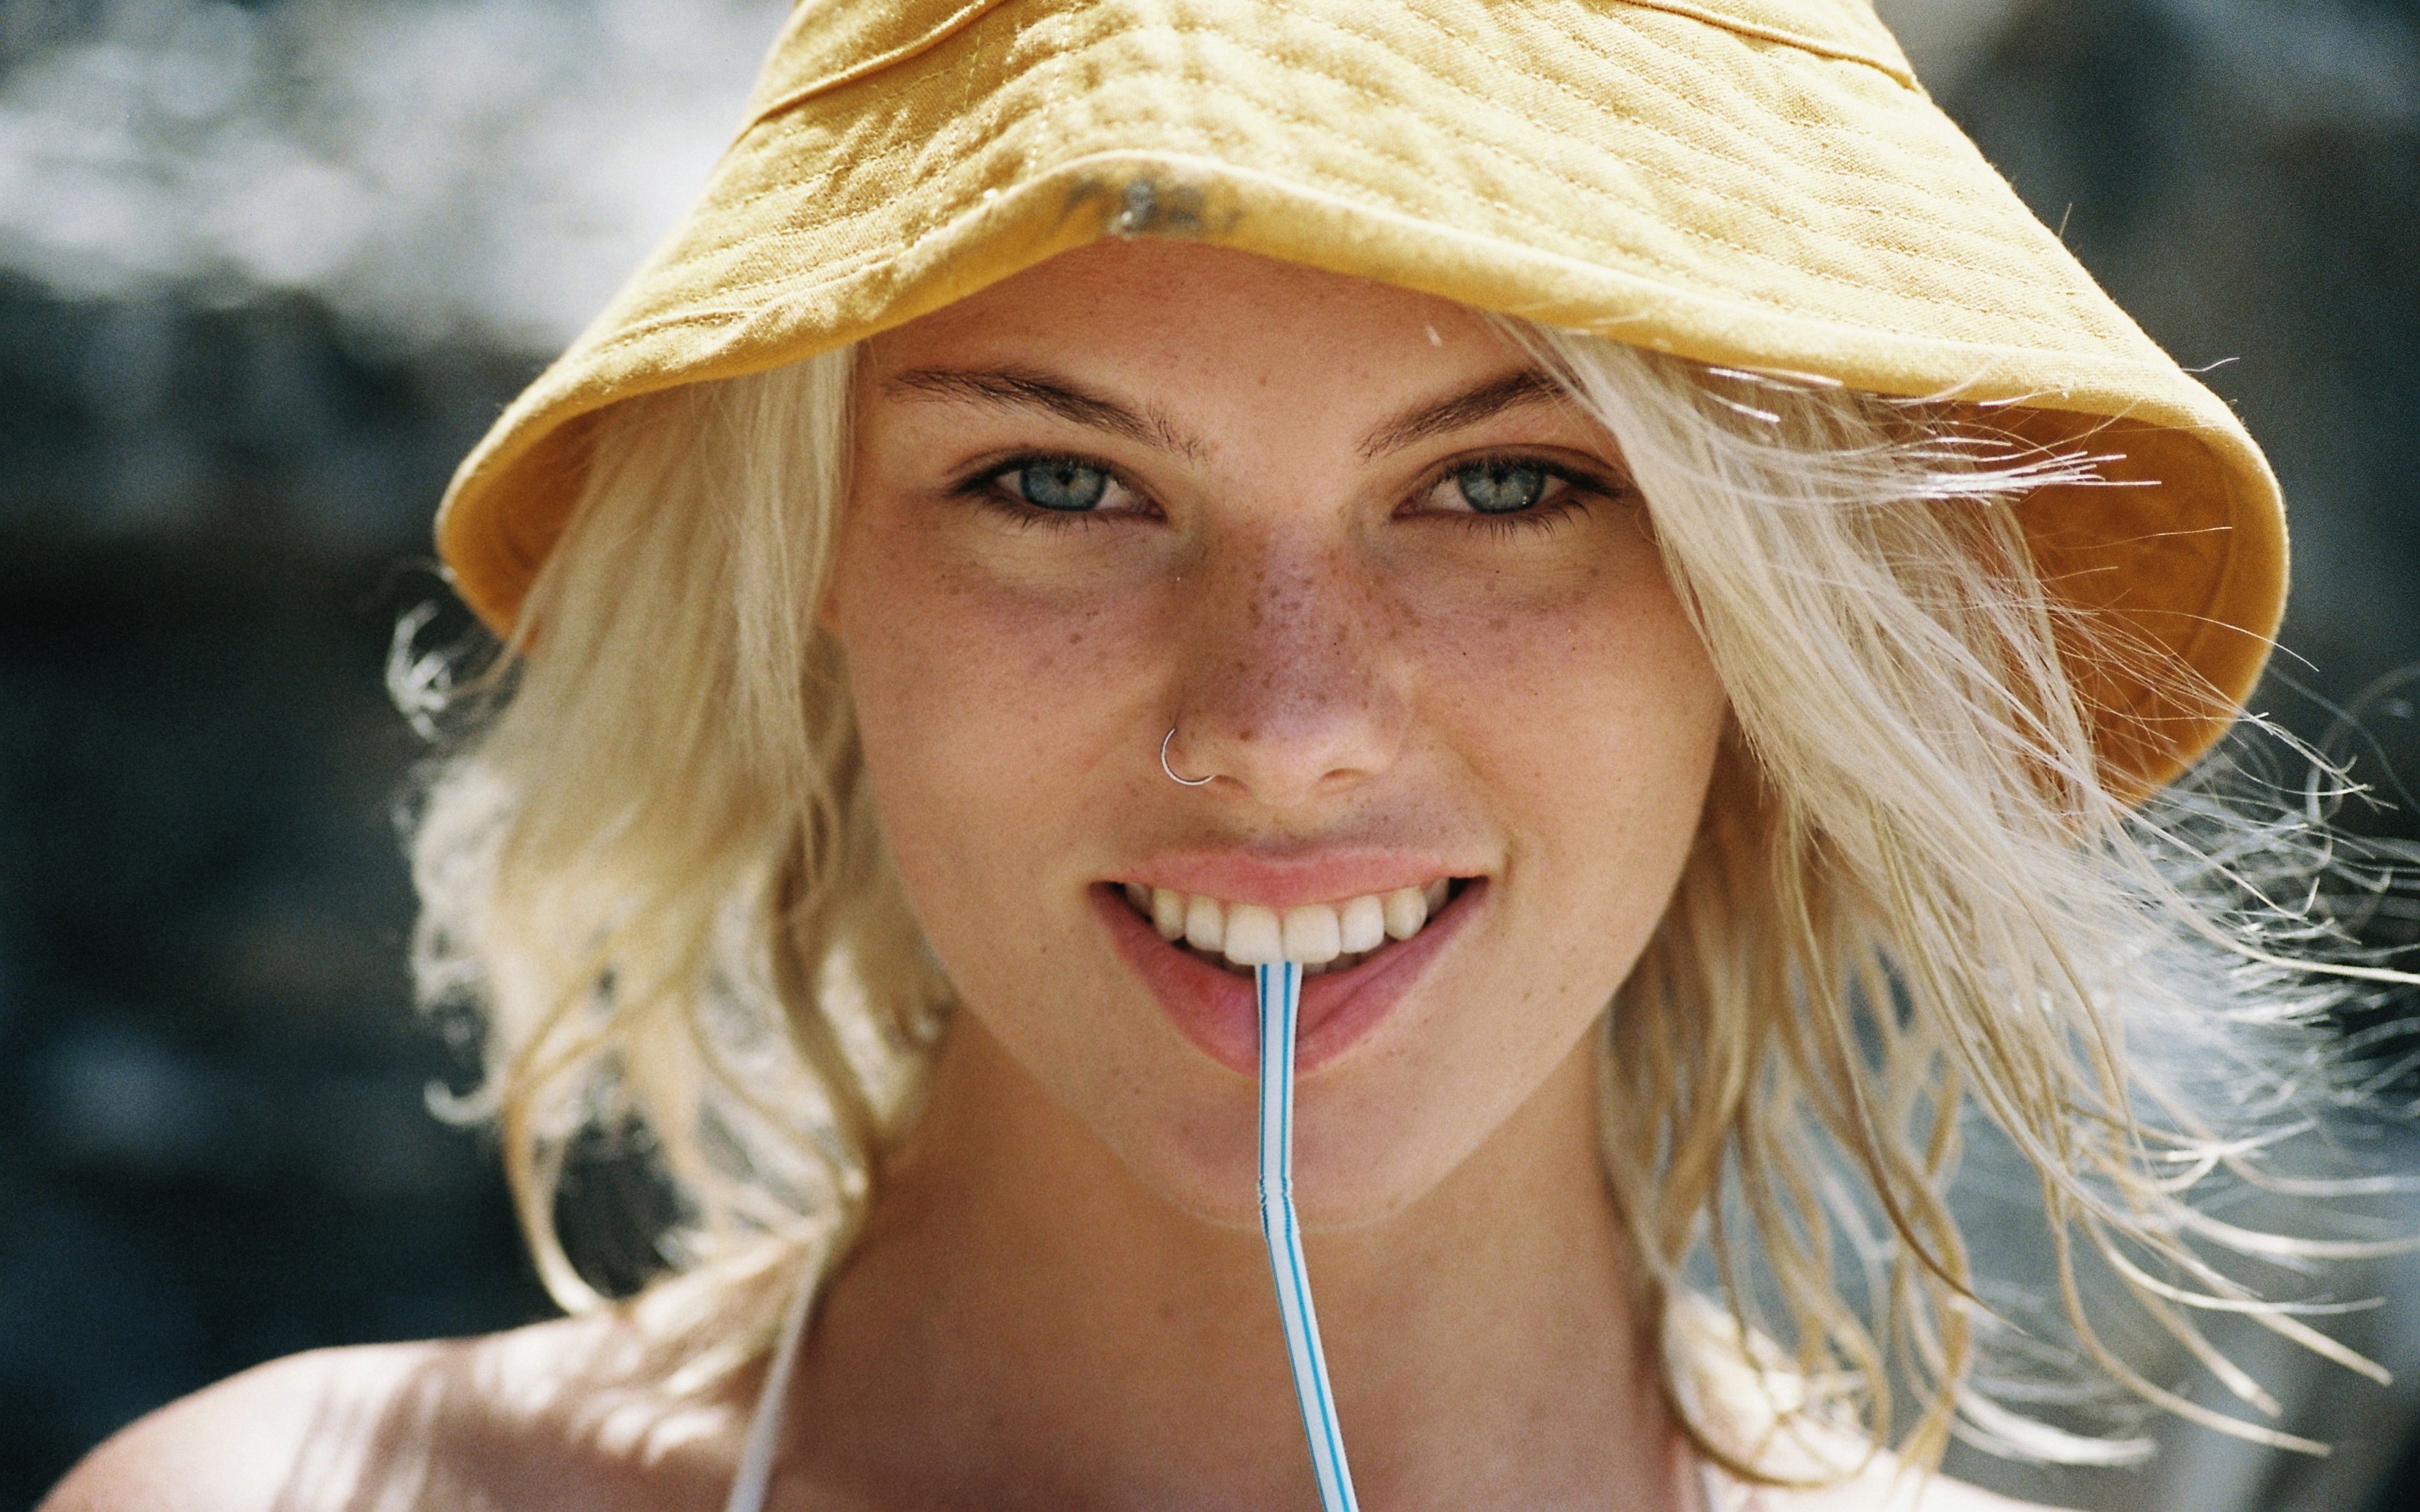 Women Face Blonde Women With Hats Summer Shoulder Length Hair Nose Ring Freckles Drinking Straw Open 3360x2100